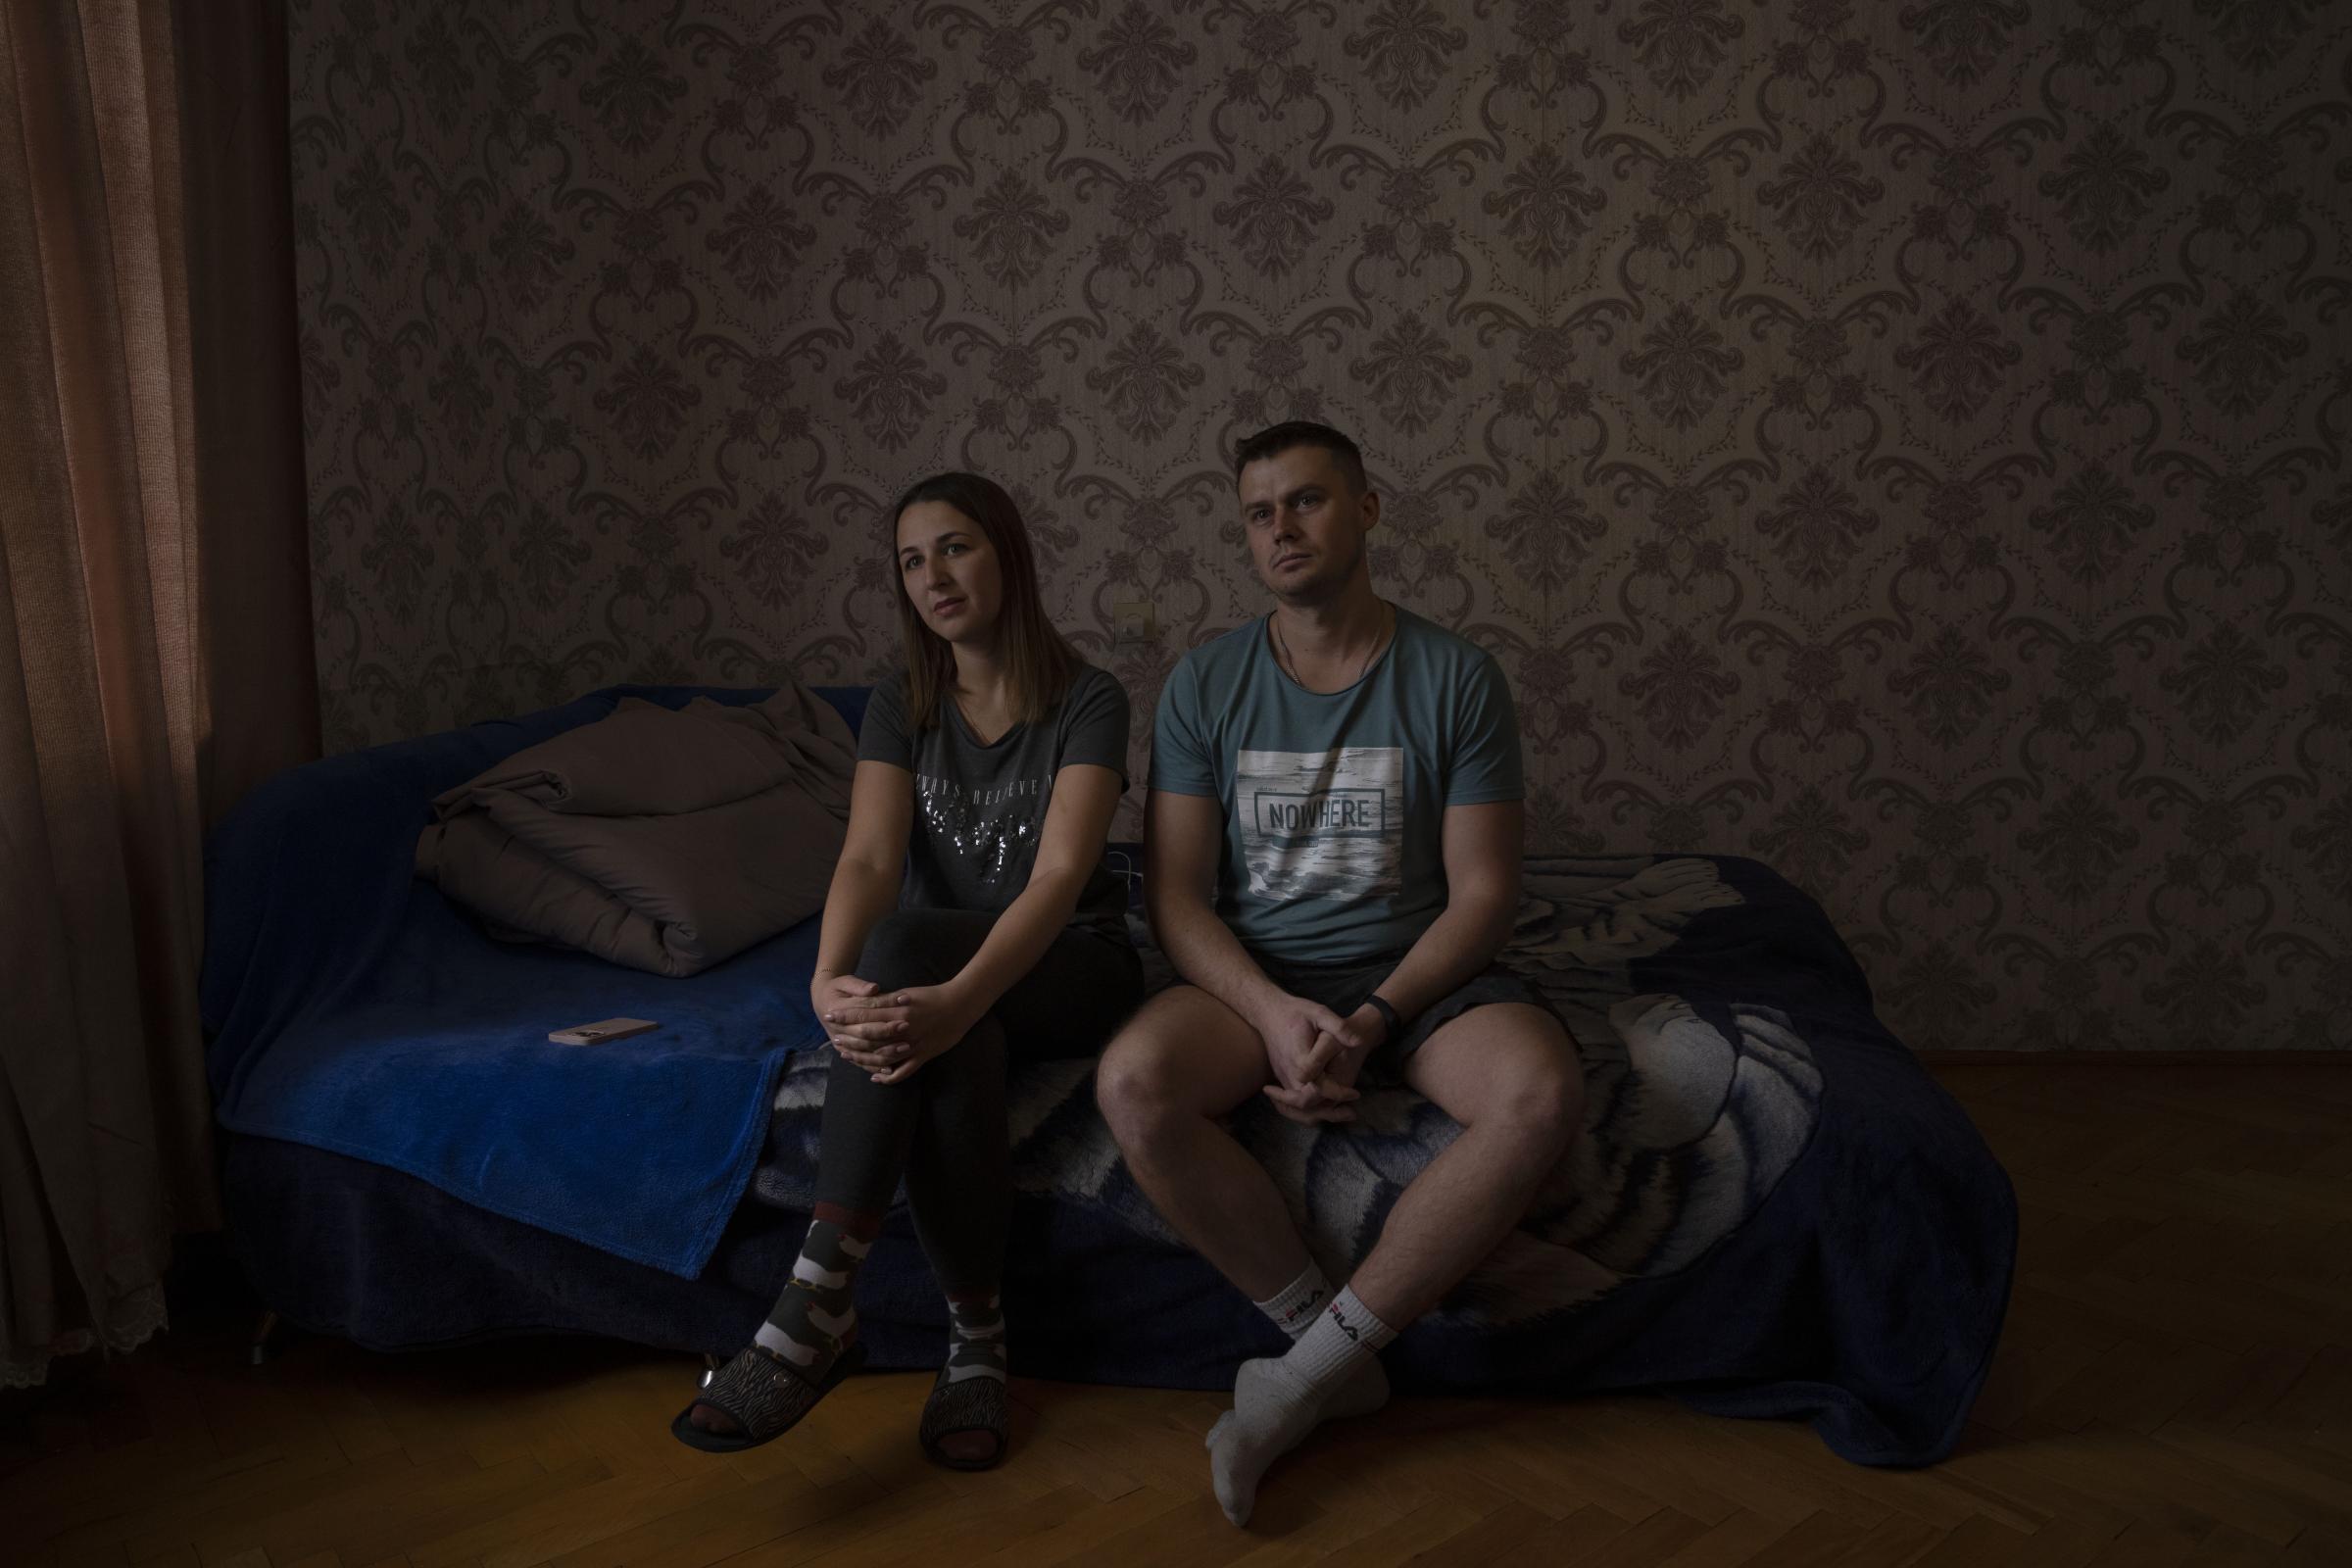 Olya Shlapak, and her husband Sasha Olexandre, recount their story after fleeing their home in Kharkiv.